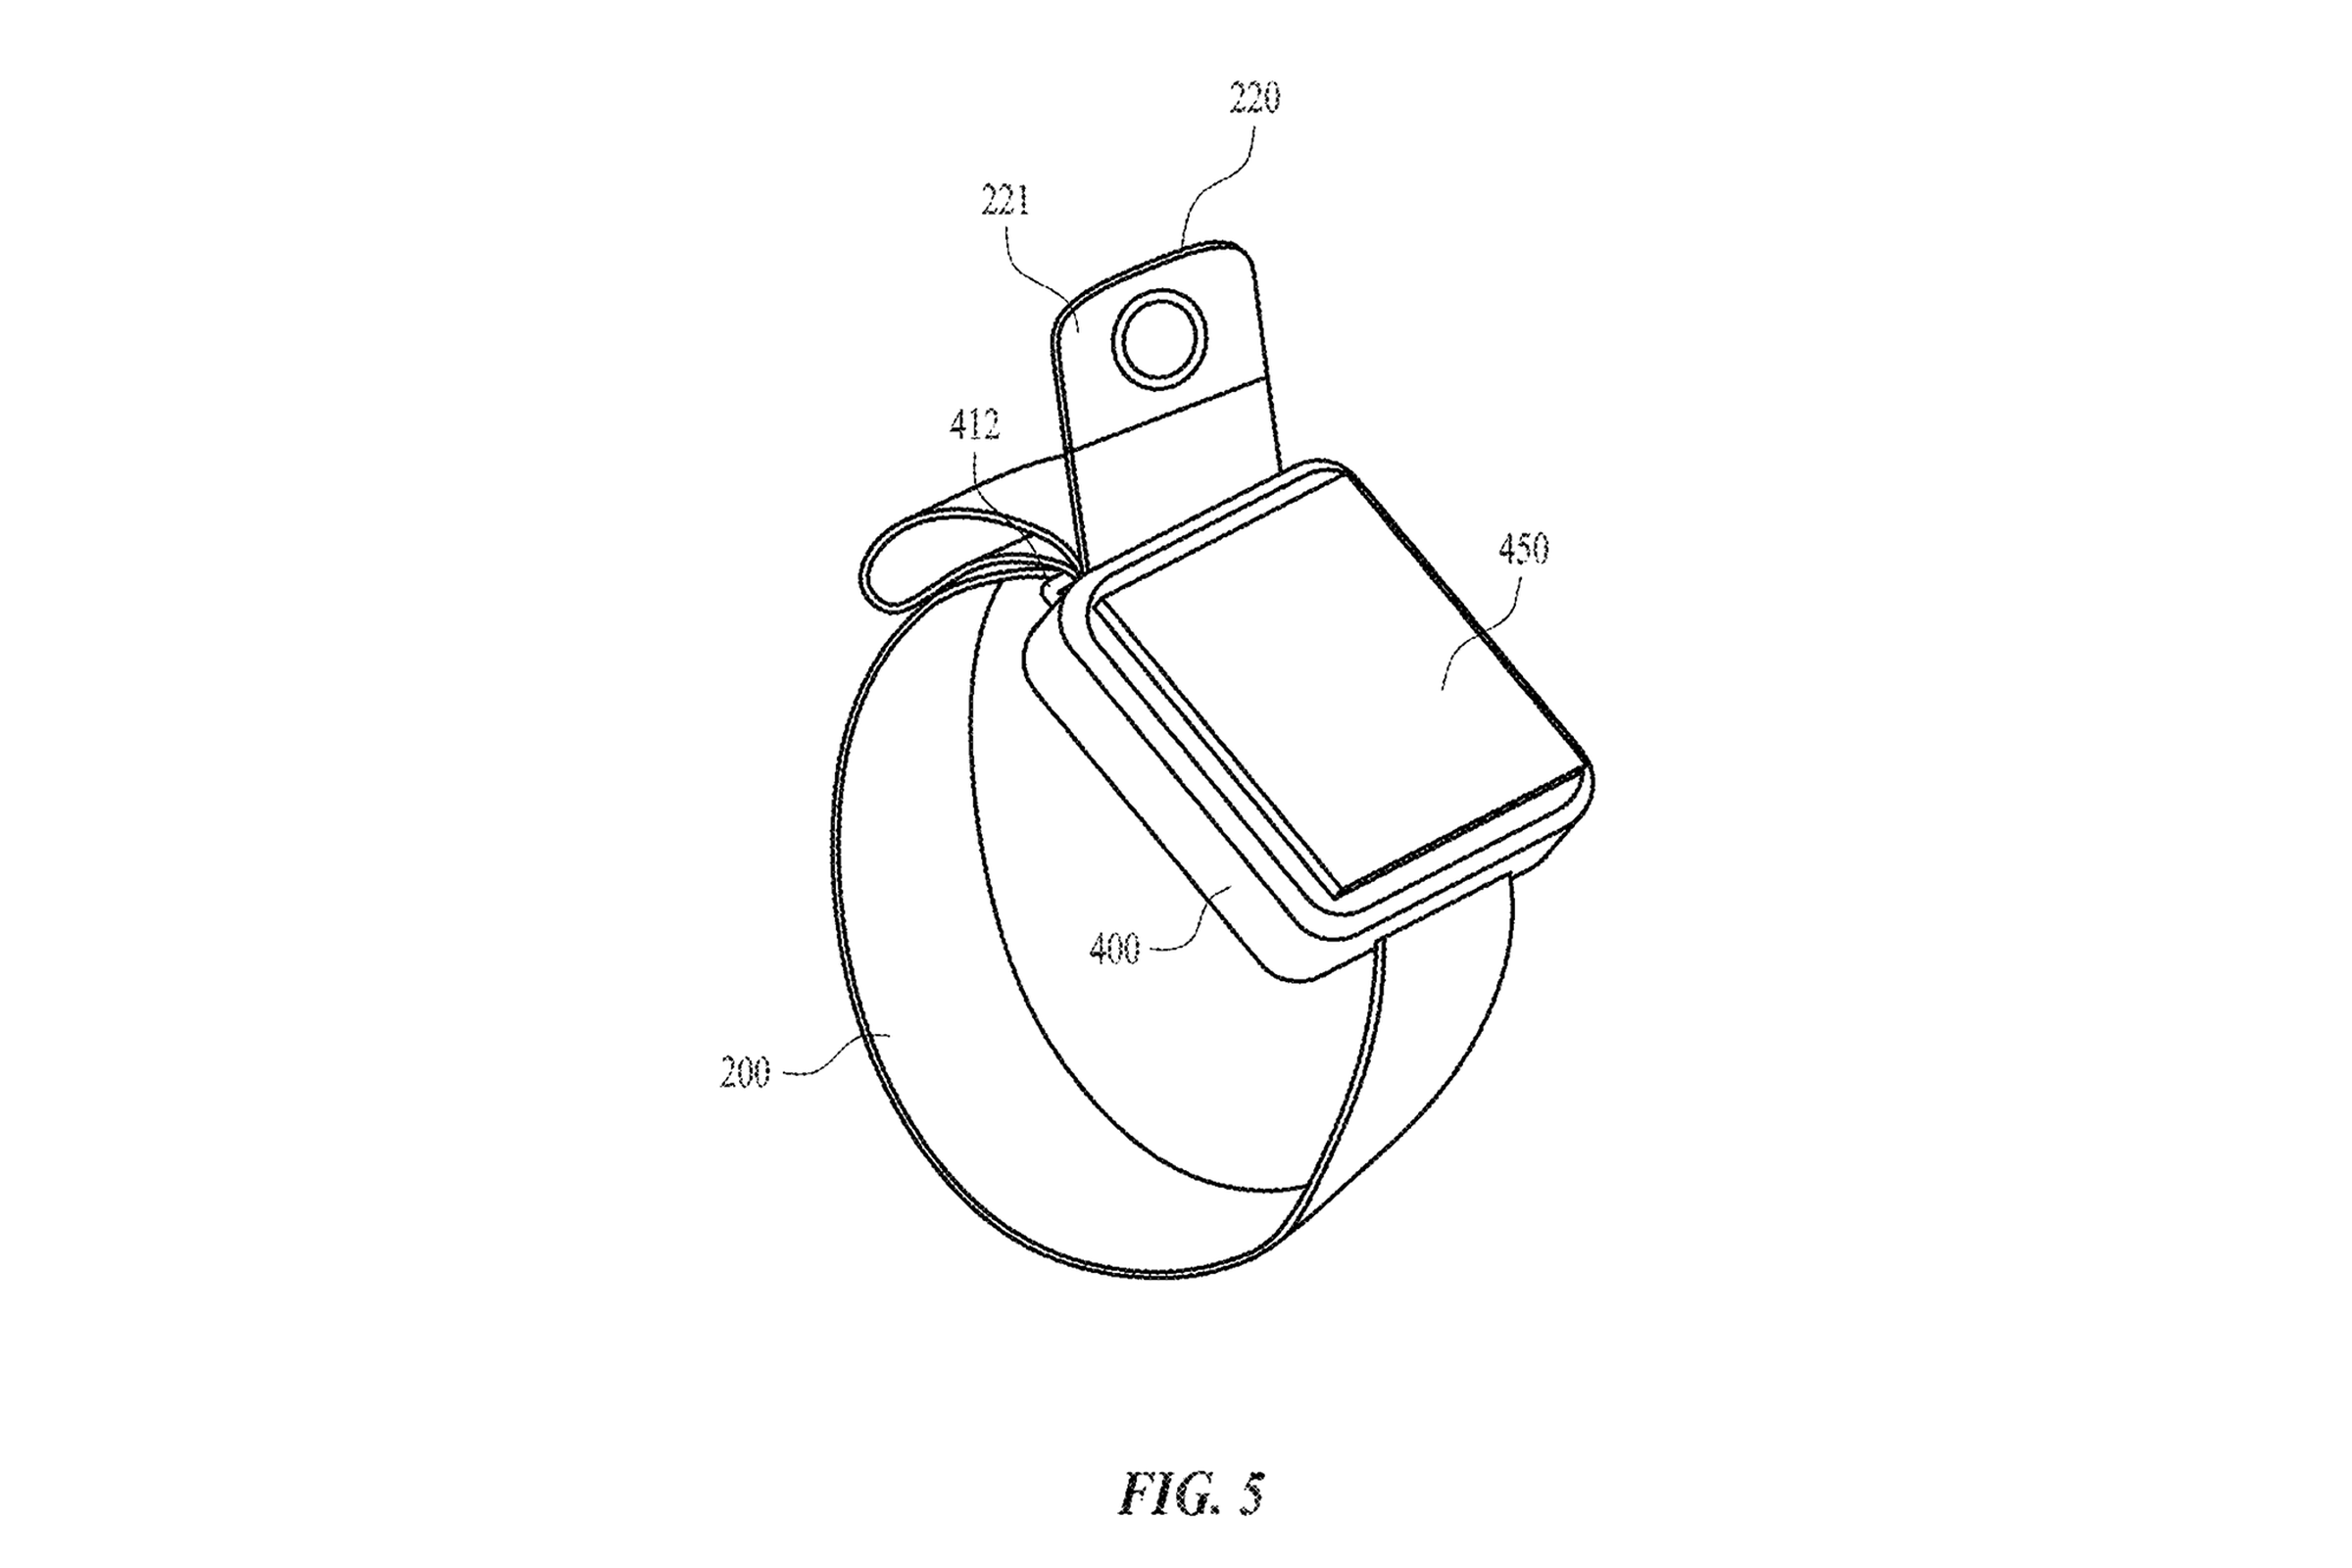 Figure 5 of a patent diagram showing an Apple Watch with a strap. At the end of the strap is a small section showing an image sensor.